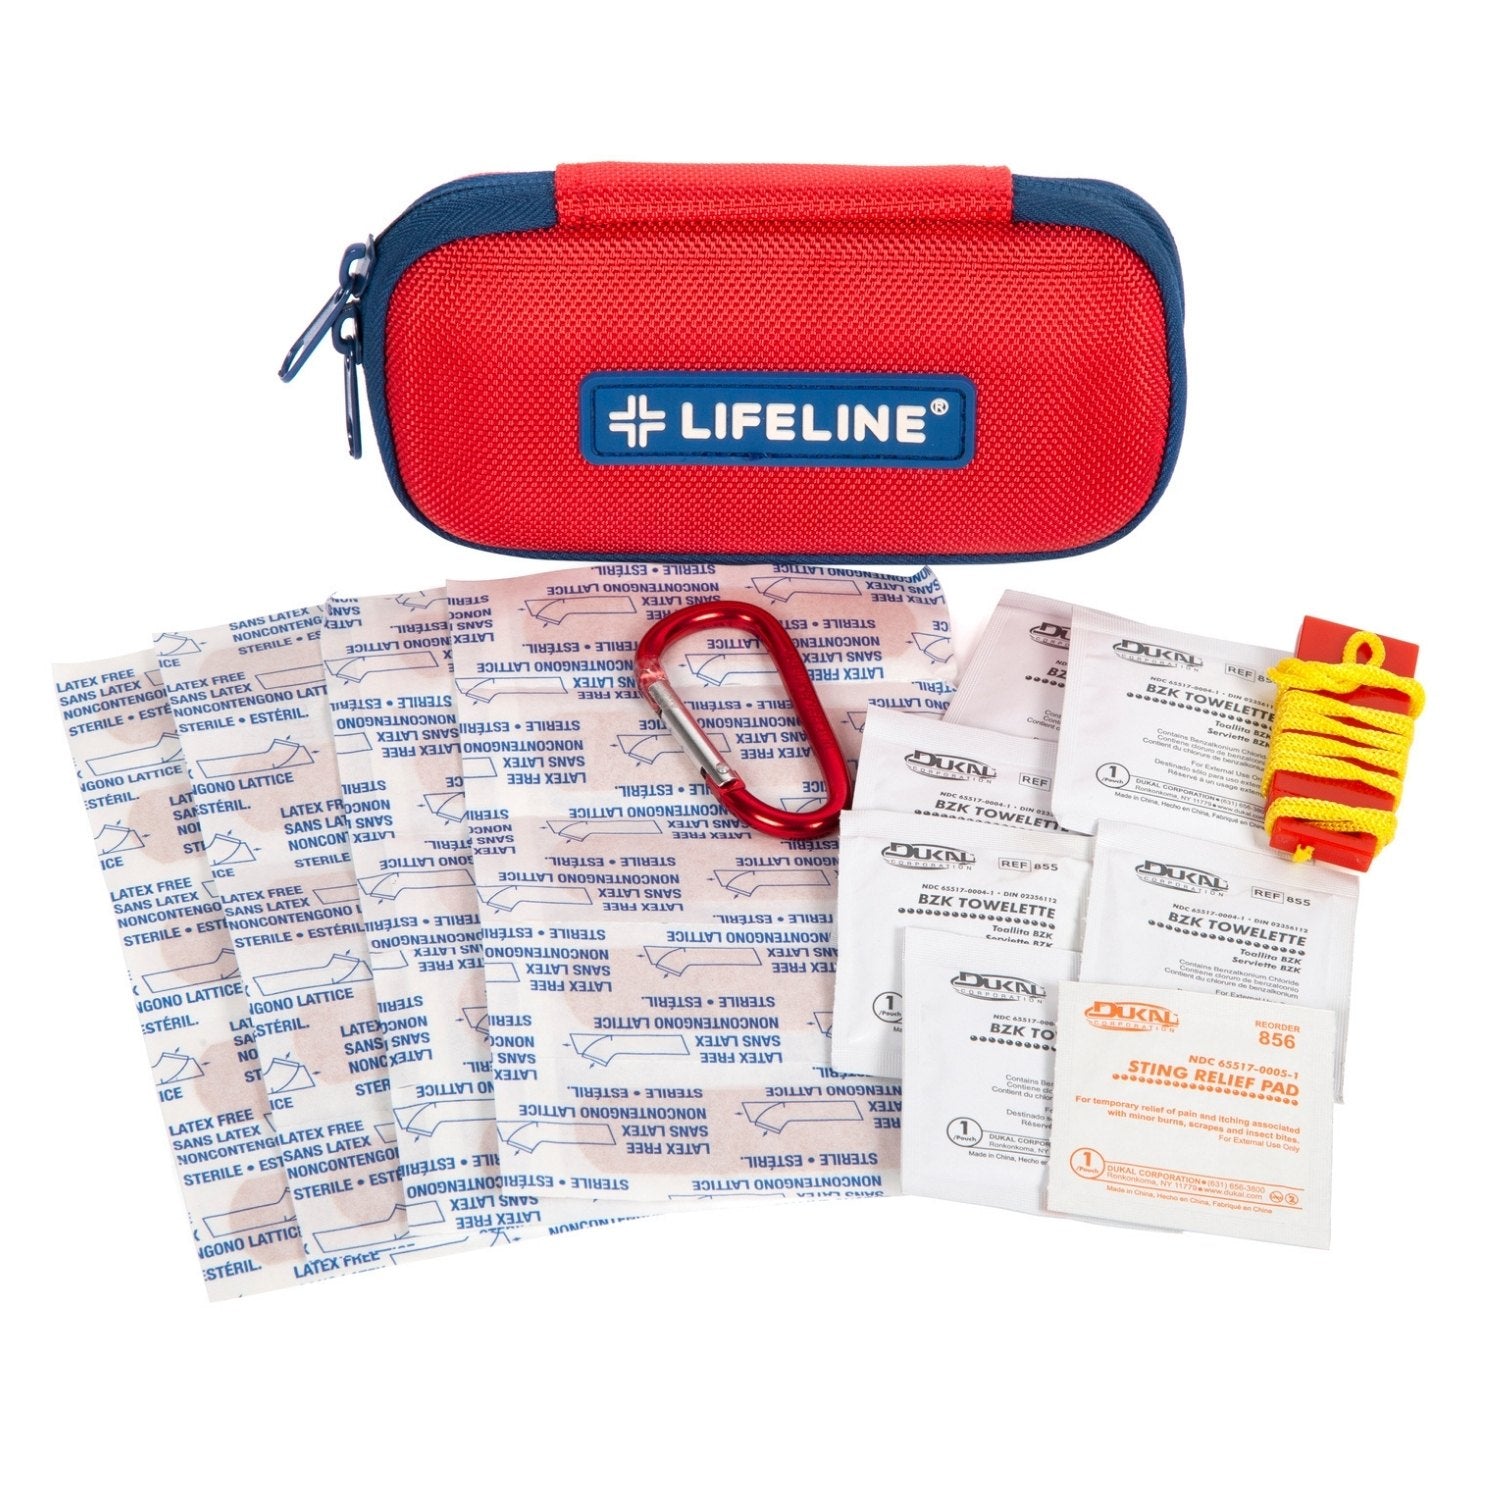 The MEDIC pro version is filled with essential first aid supplies and more advanced trauma level equipment